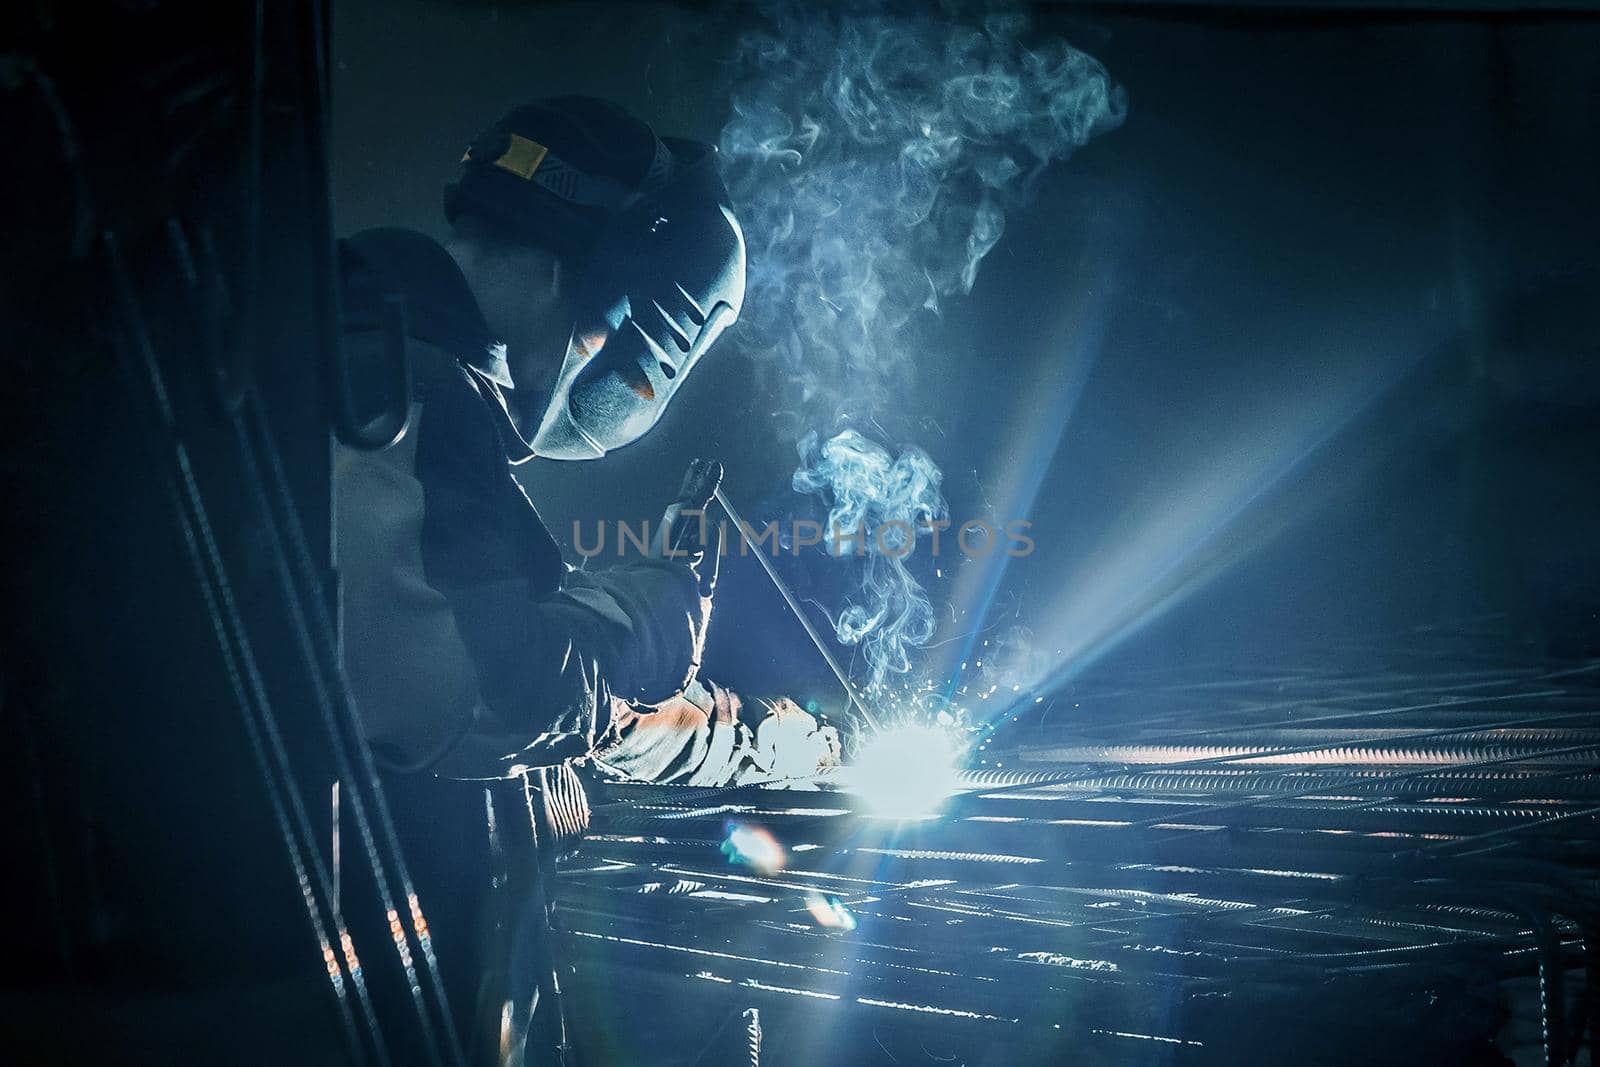 A masked working man is doing welding work on metal structures in a factory or industrial enterprise.